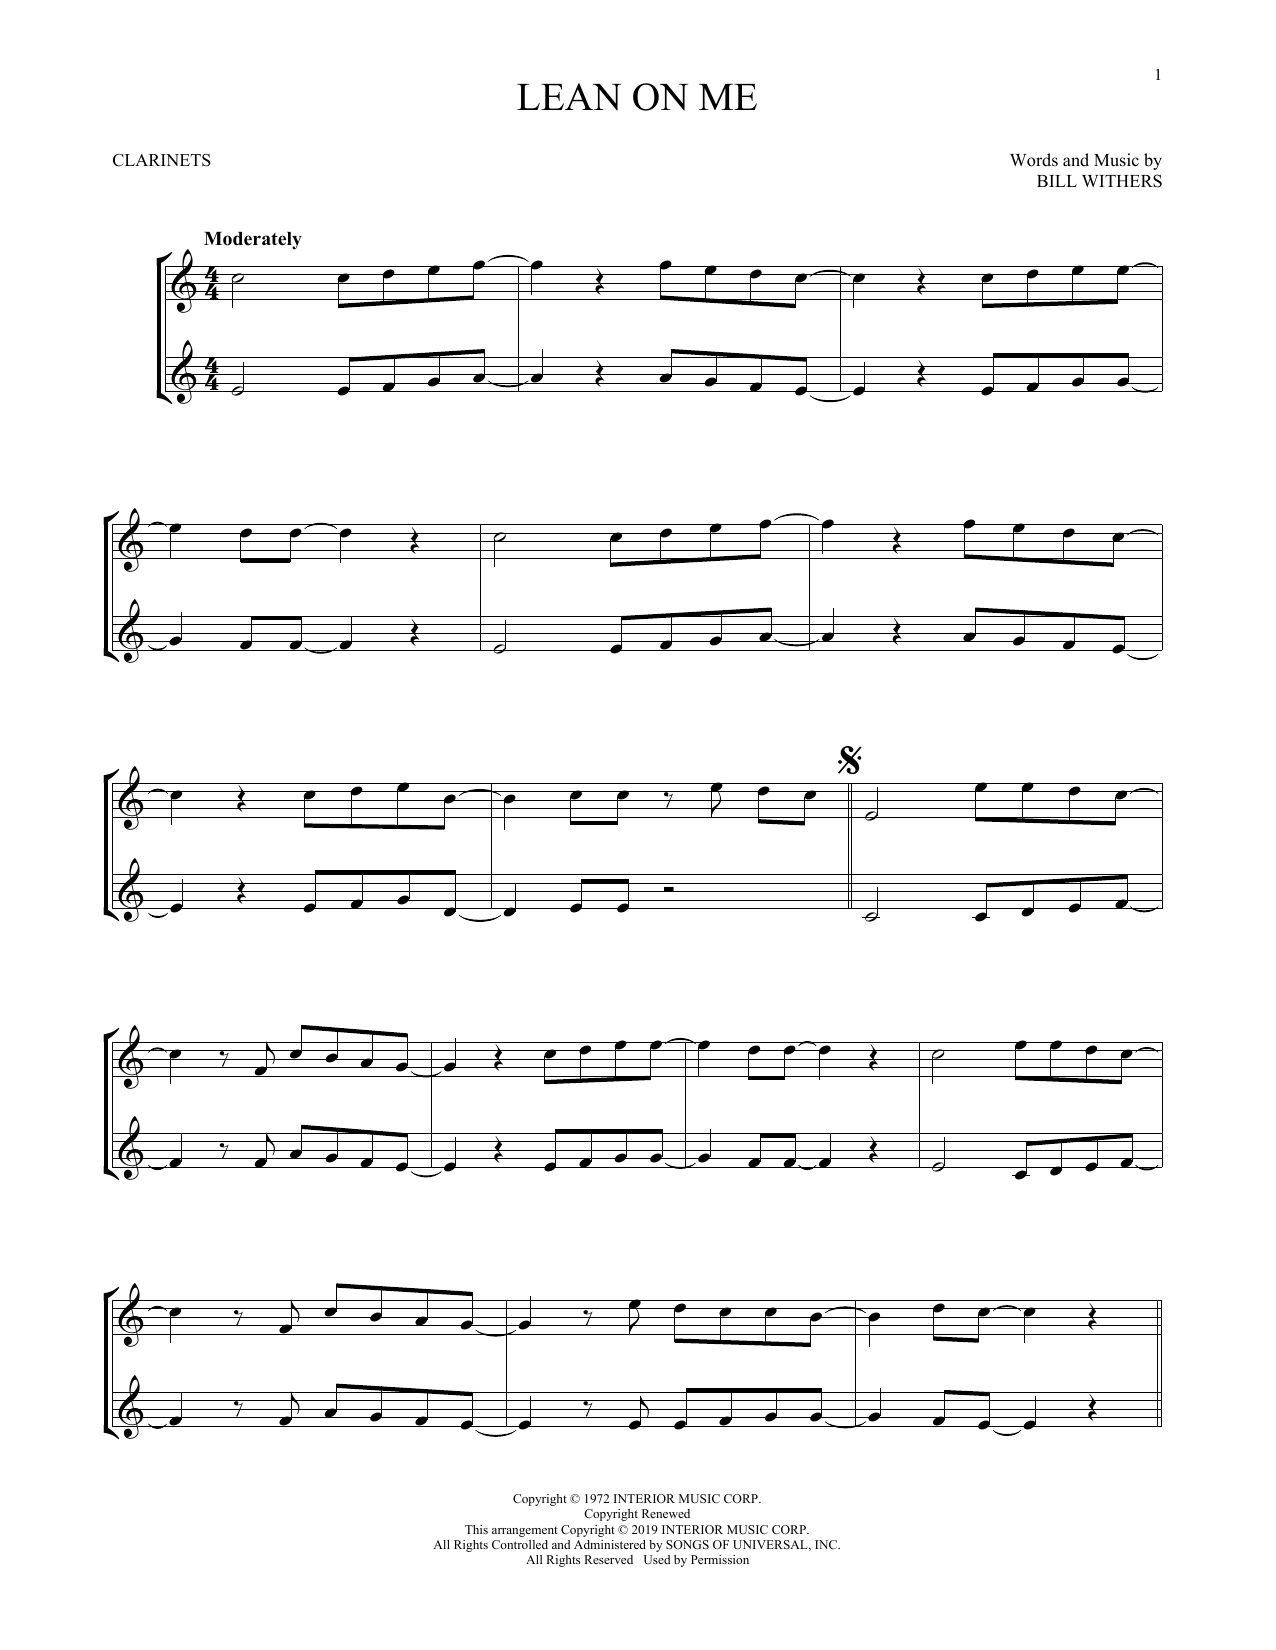 Download Bill Withers Lean On Me Sheet Music